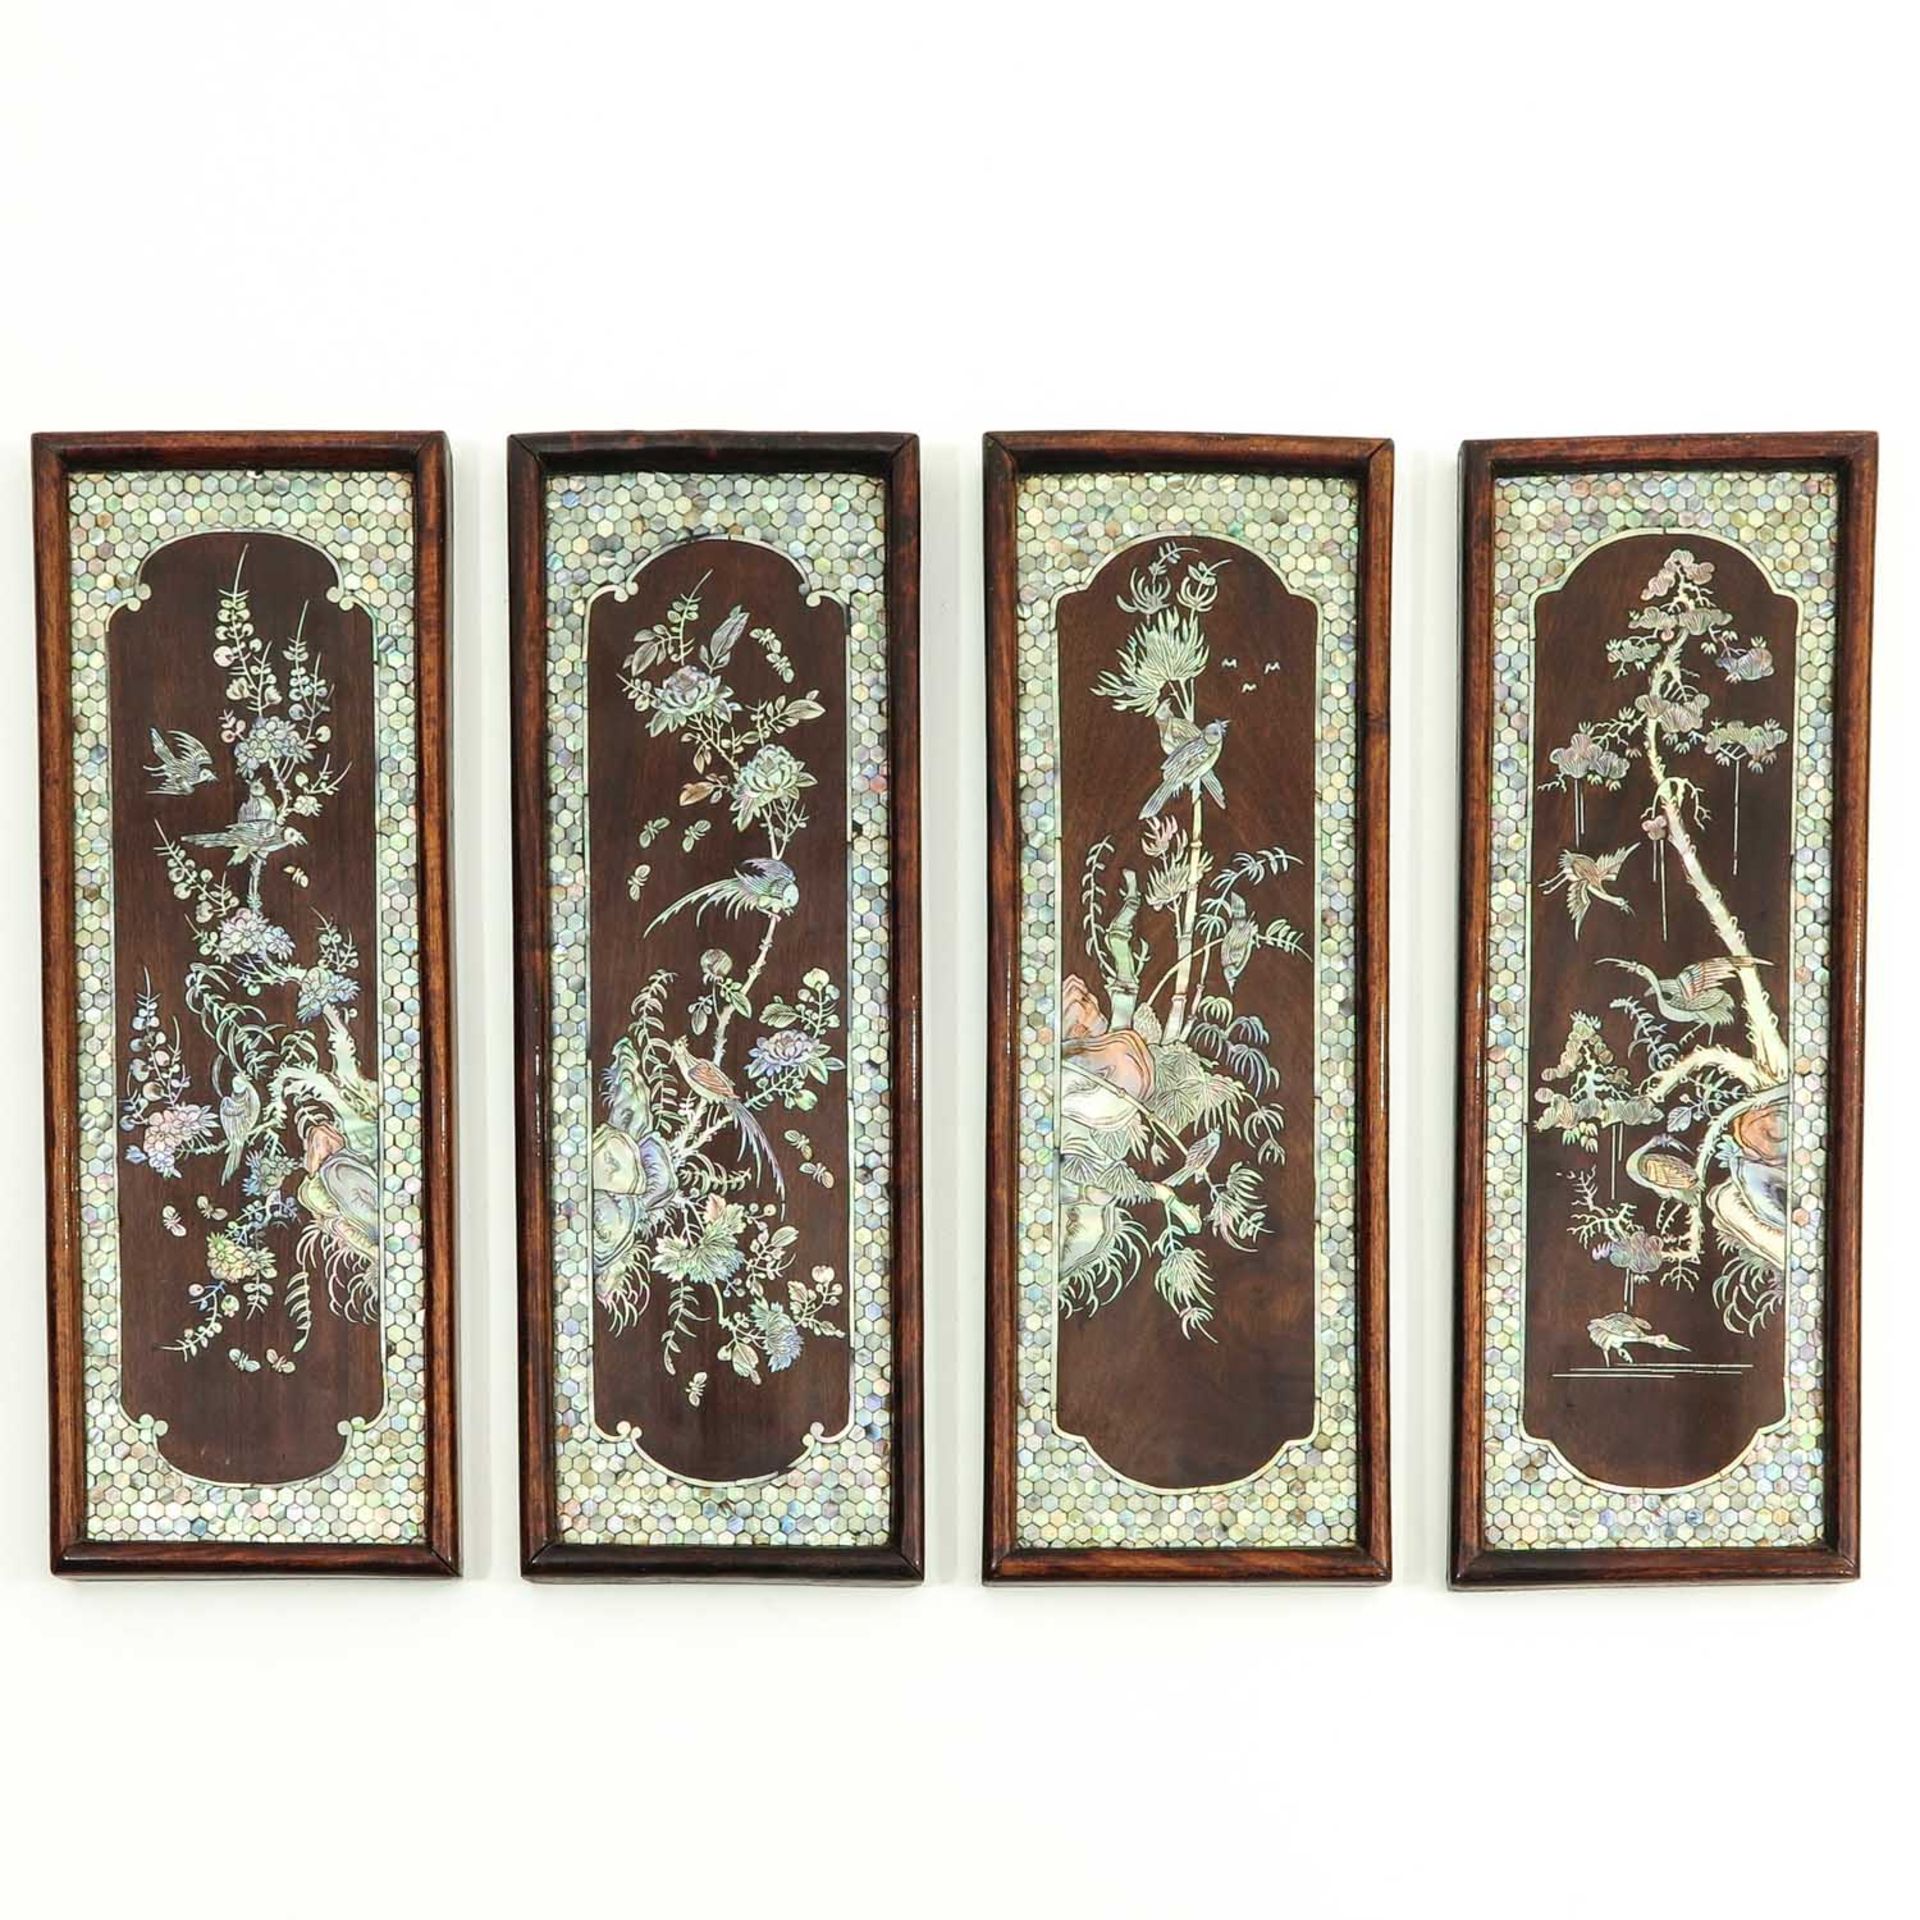 A Series of 4 Wall Panels